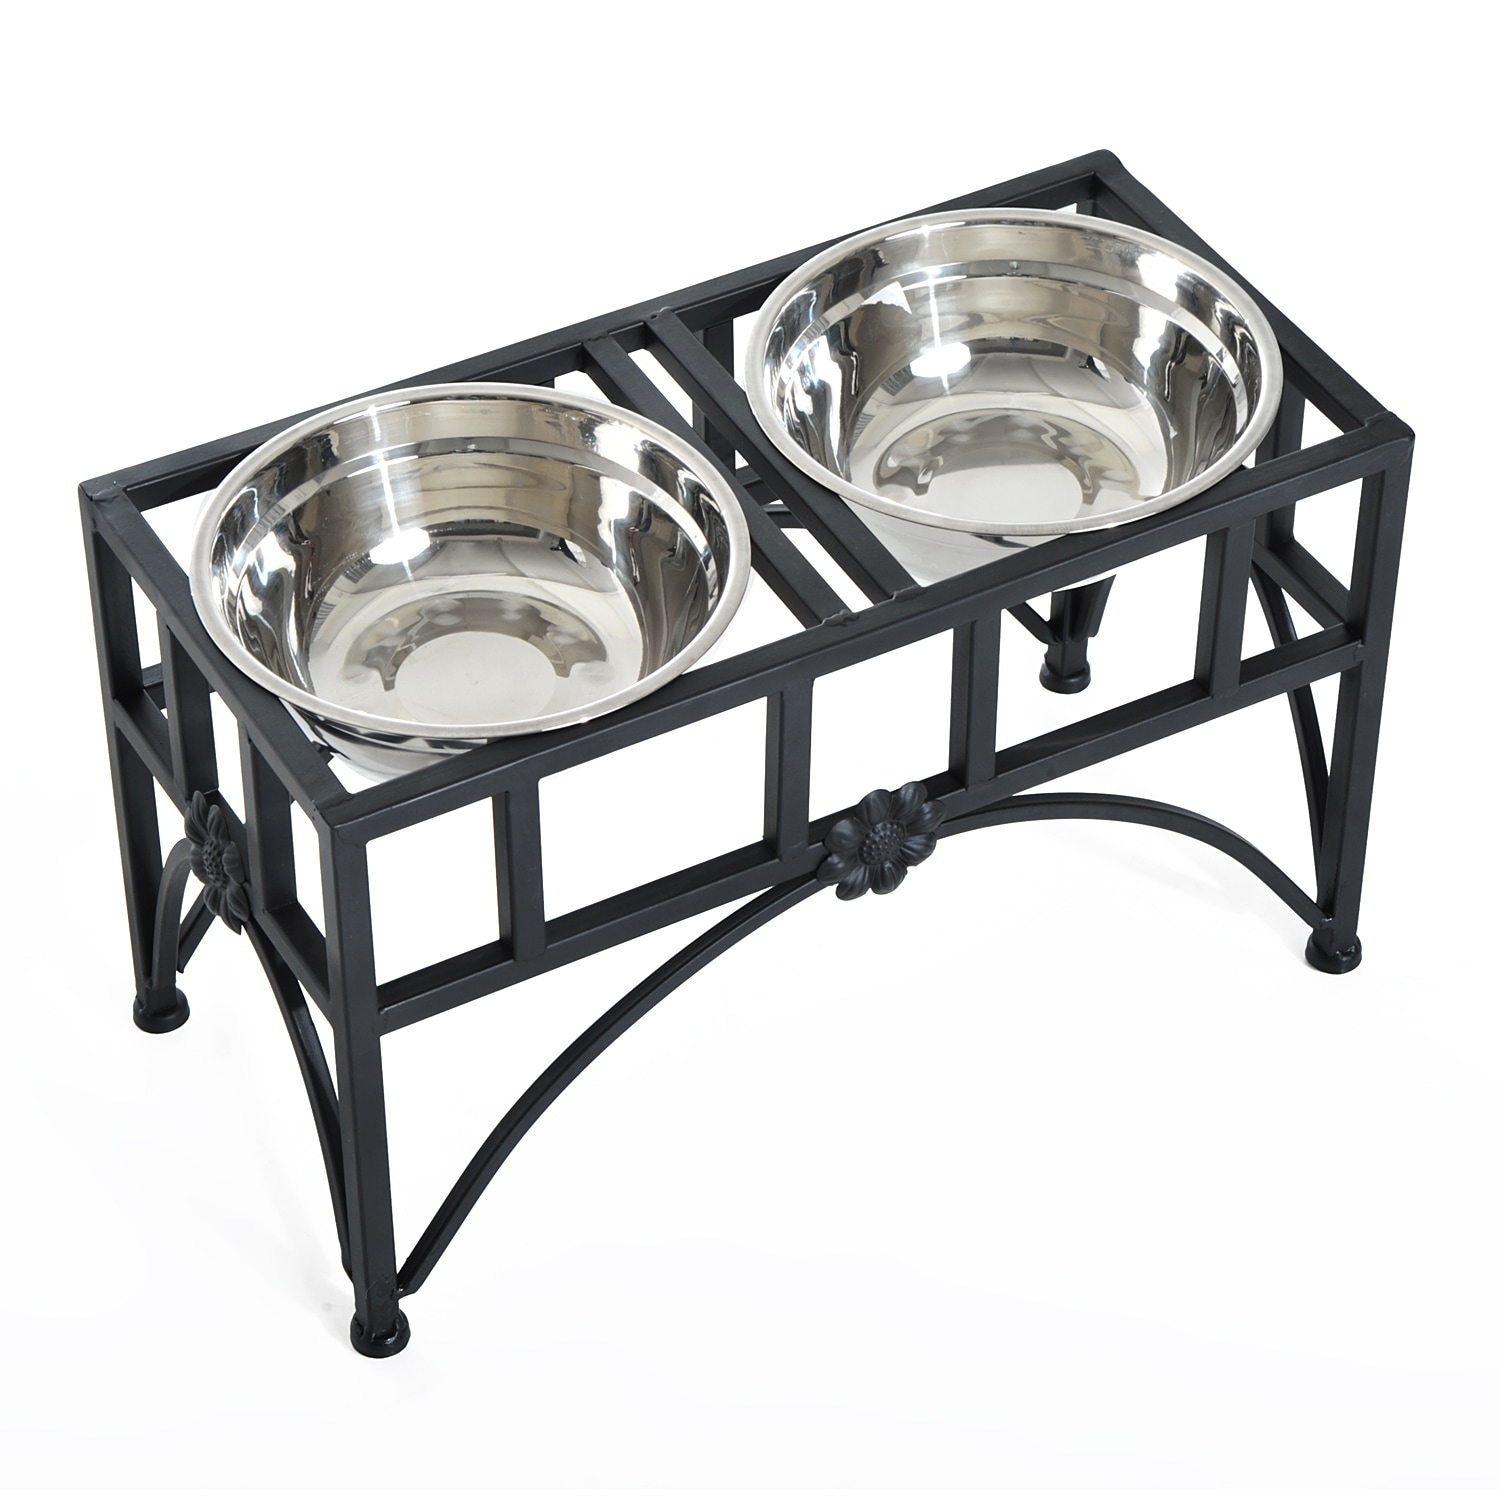 https://ak1.ostkcdn.com/images/products/22501422/PawHut-22-Double-Stainless-Steel-Heavy-Duty-Dog-Food-Bowl-Pet-Elevated-Feeding-Station-e78a5c8b-77ff-420e-b935-85ca6d9a4b49.jpg